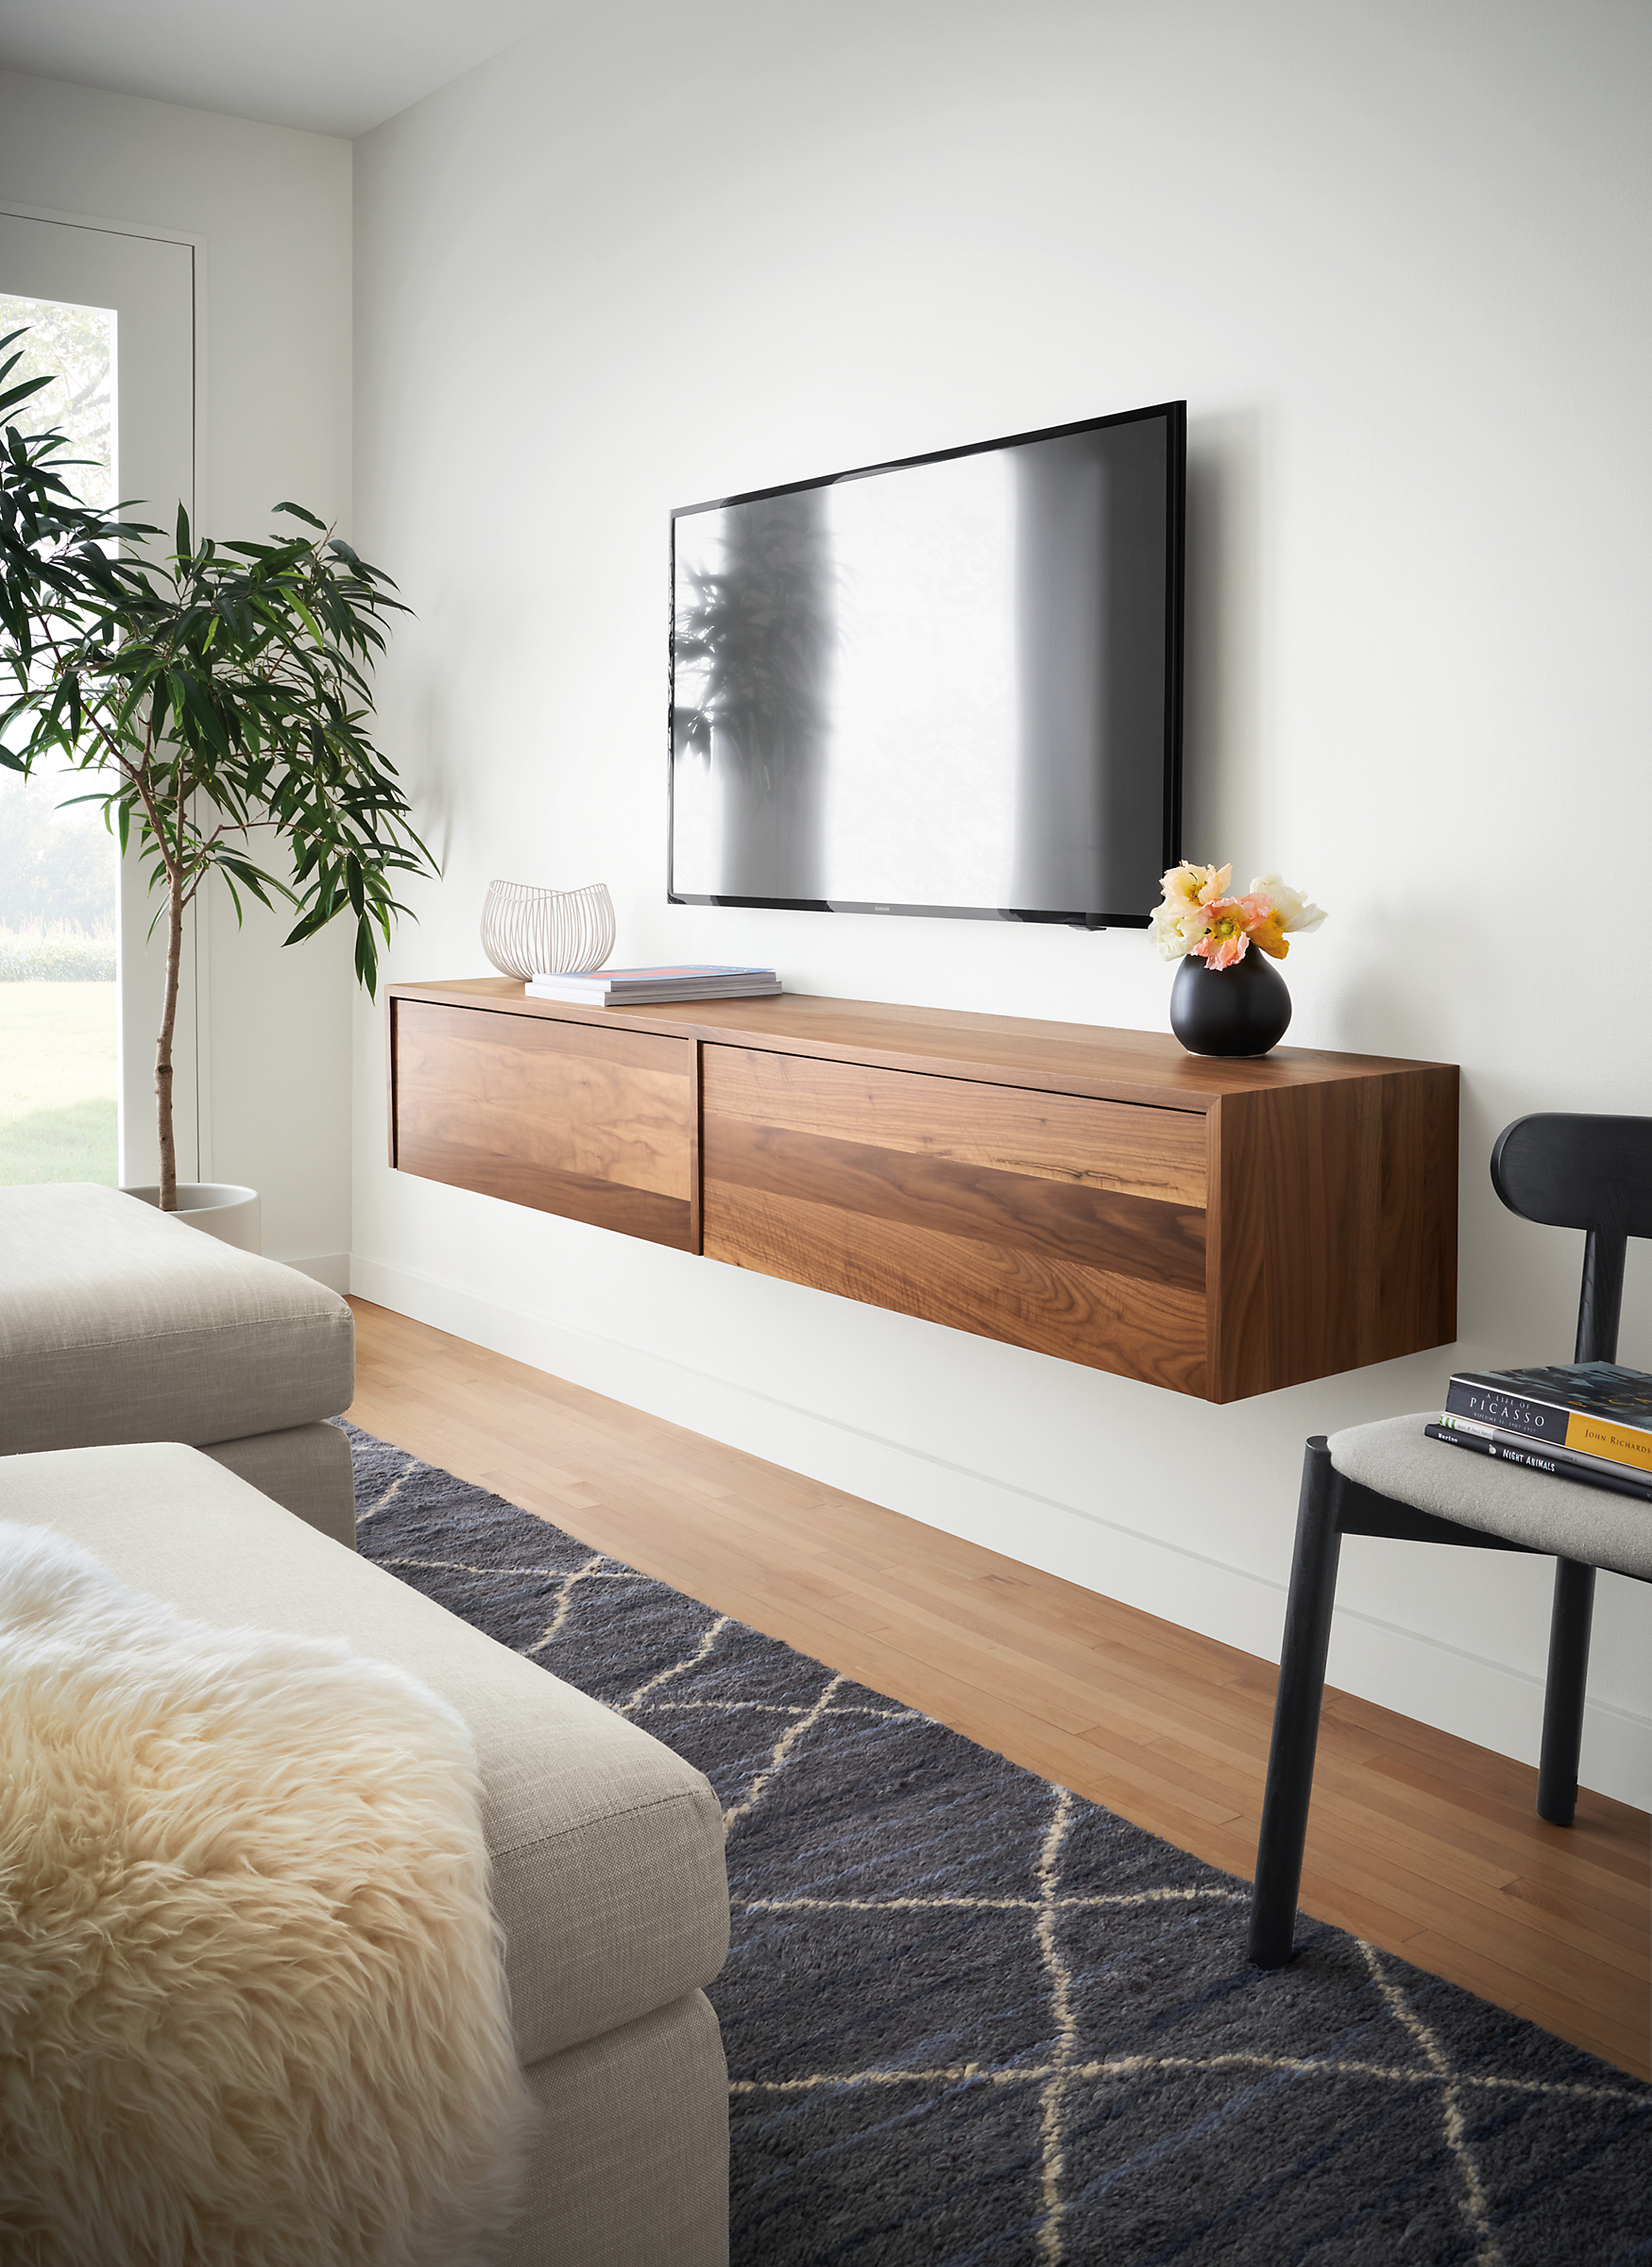 living room with hover wall-mounted meda cabinet in walnut with tv wall-mounted above it.